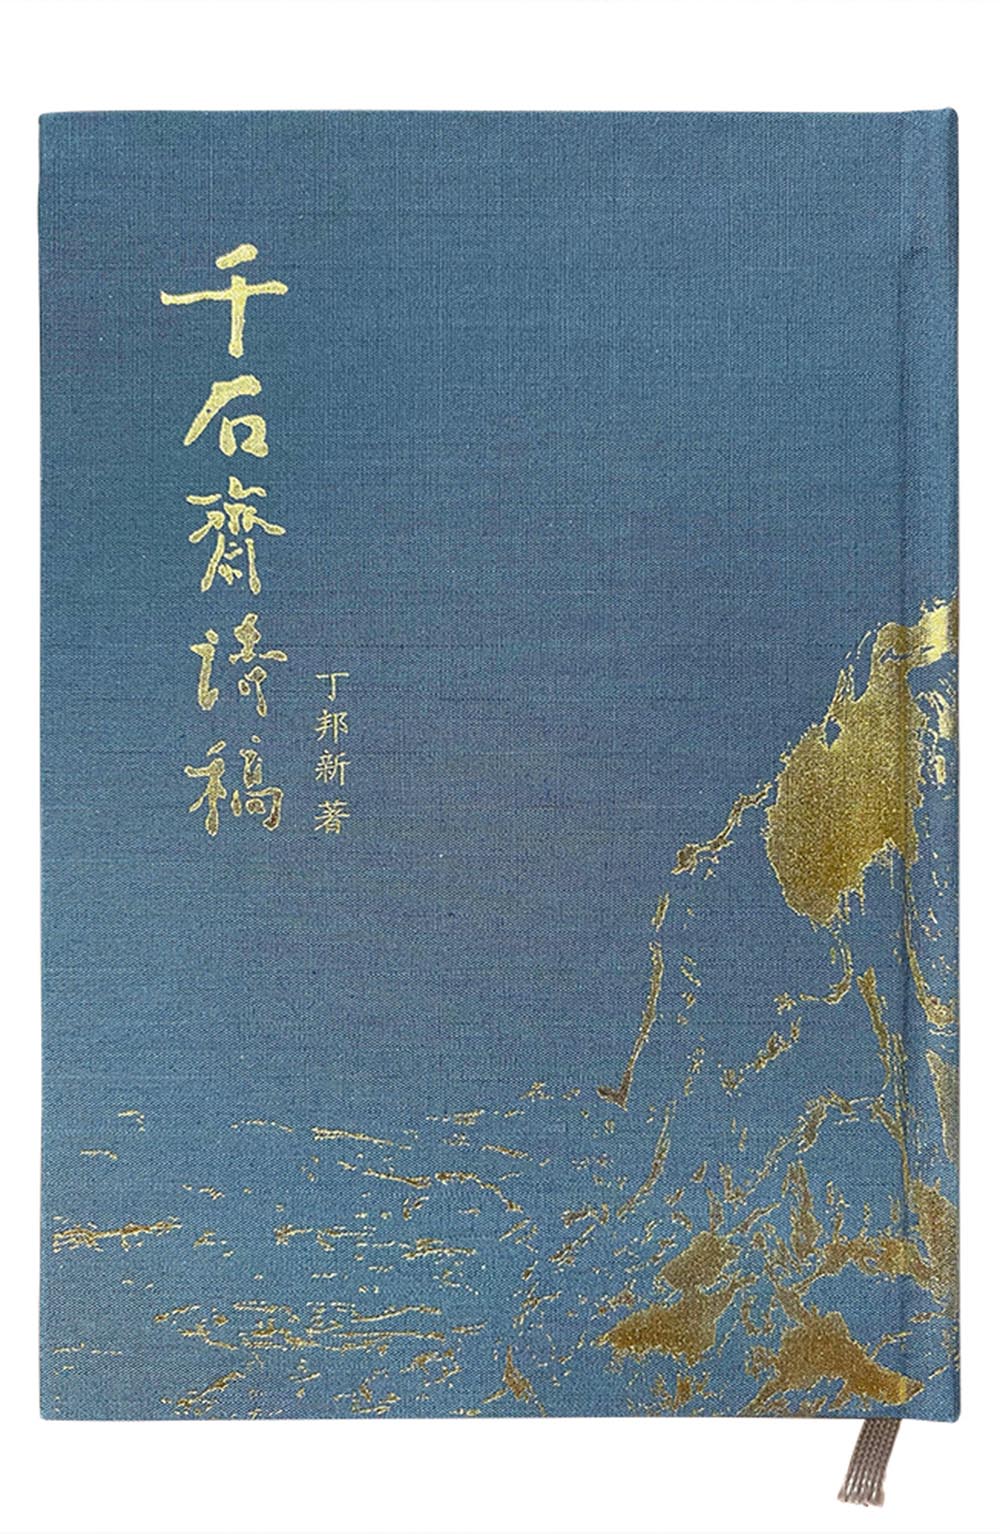 Collected Poems from Pang-Hsin Ting